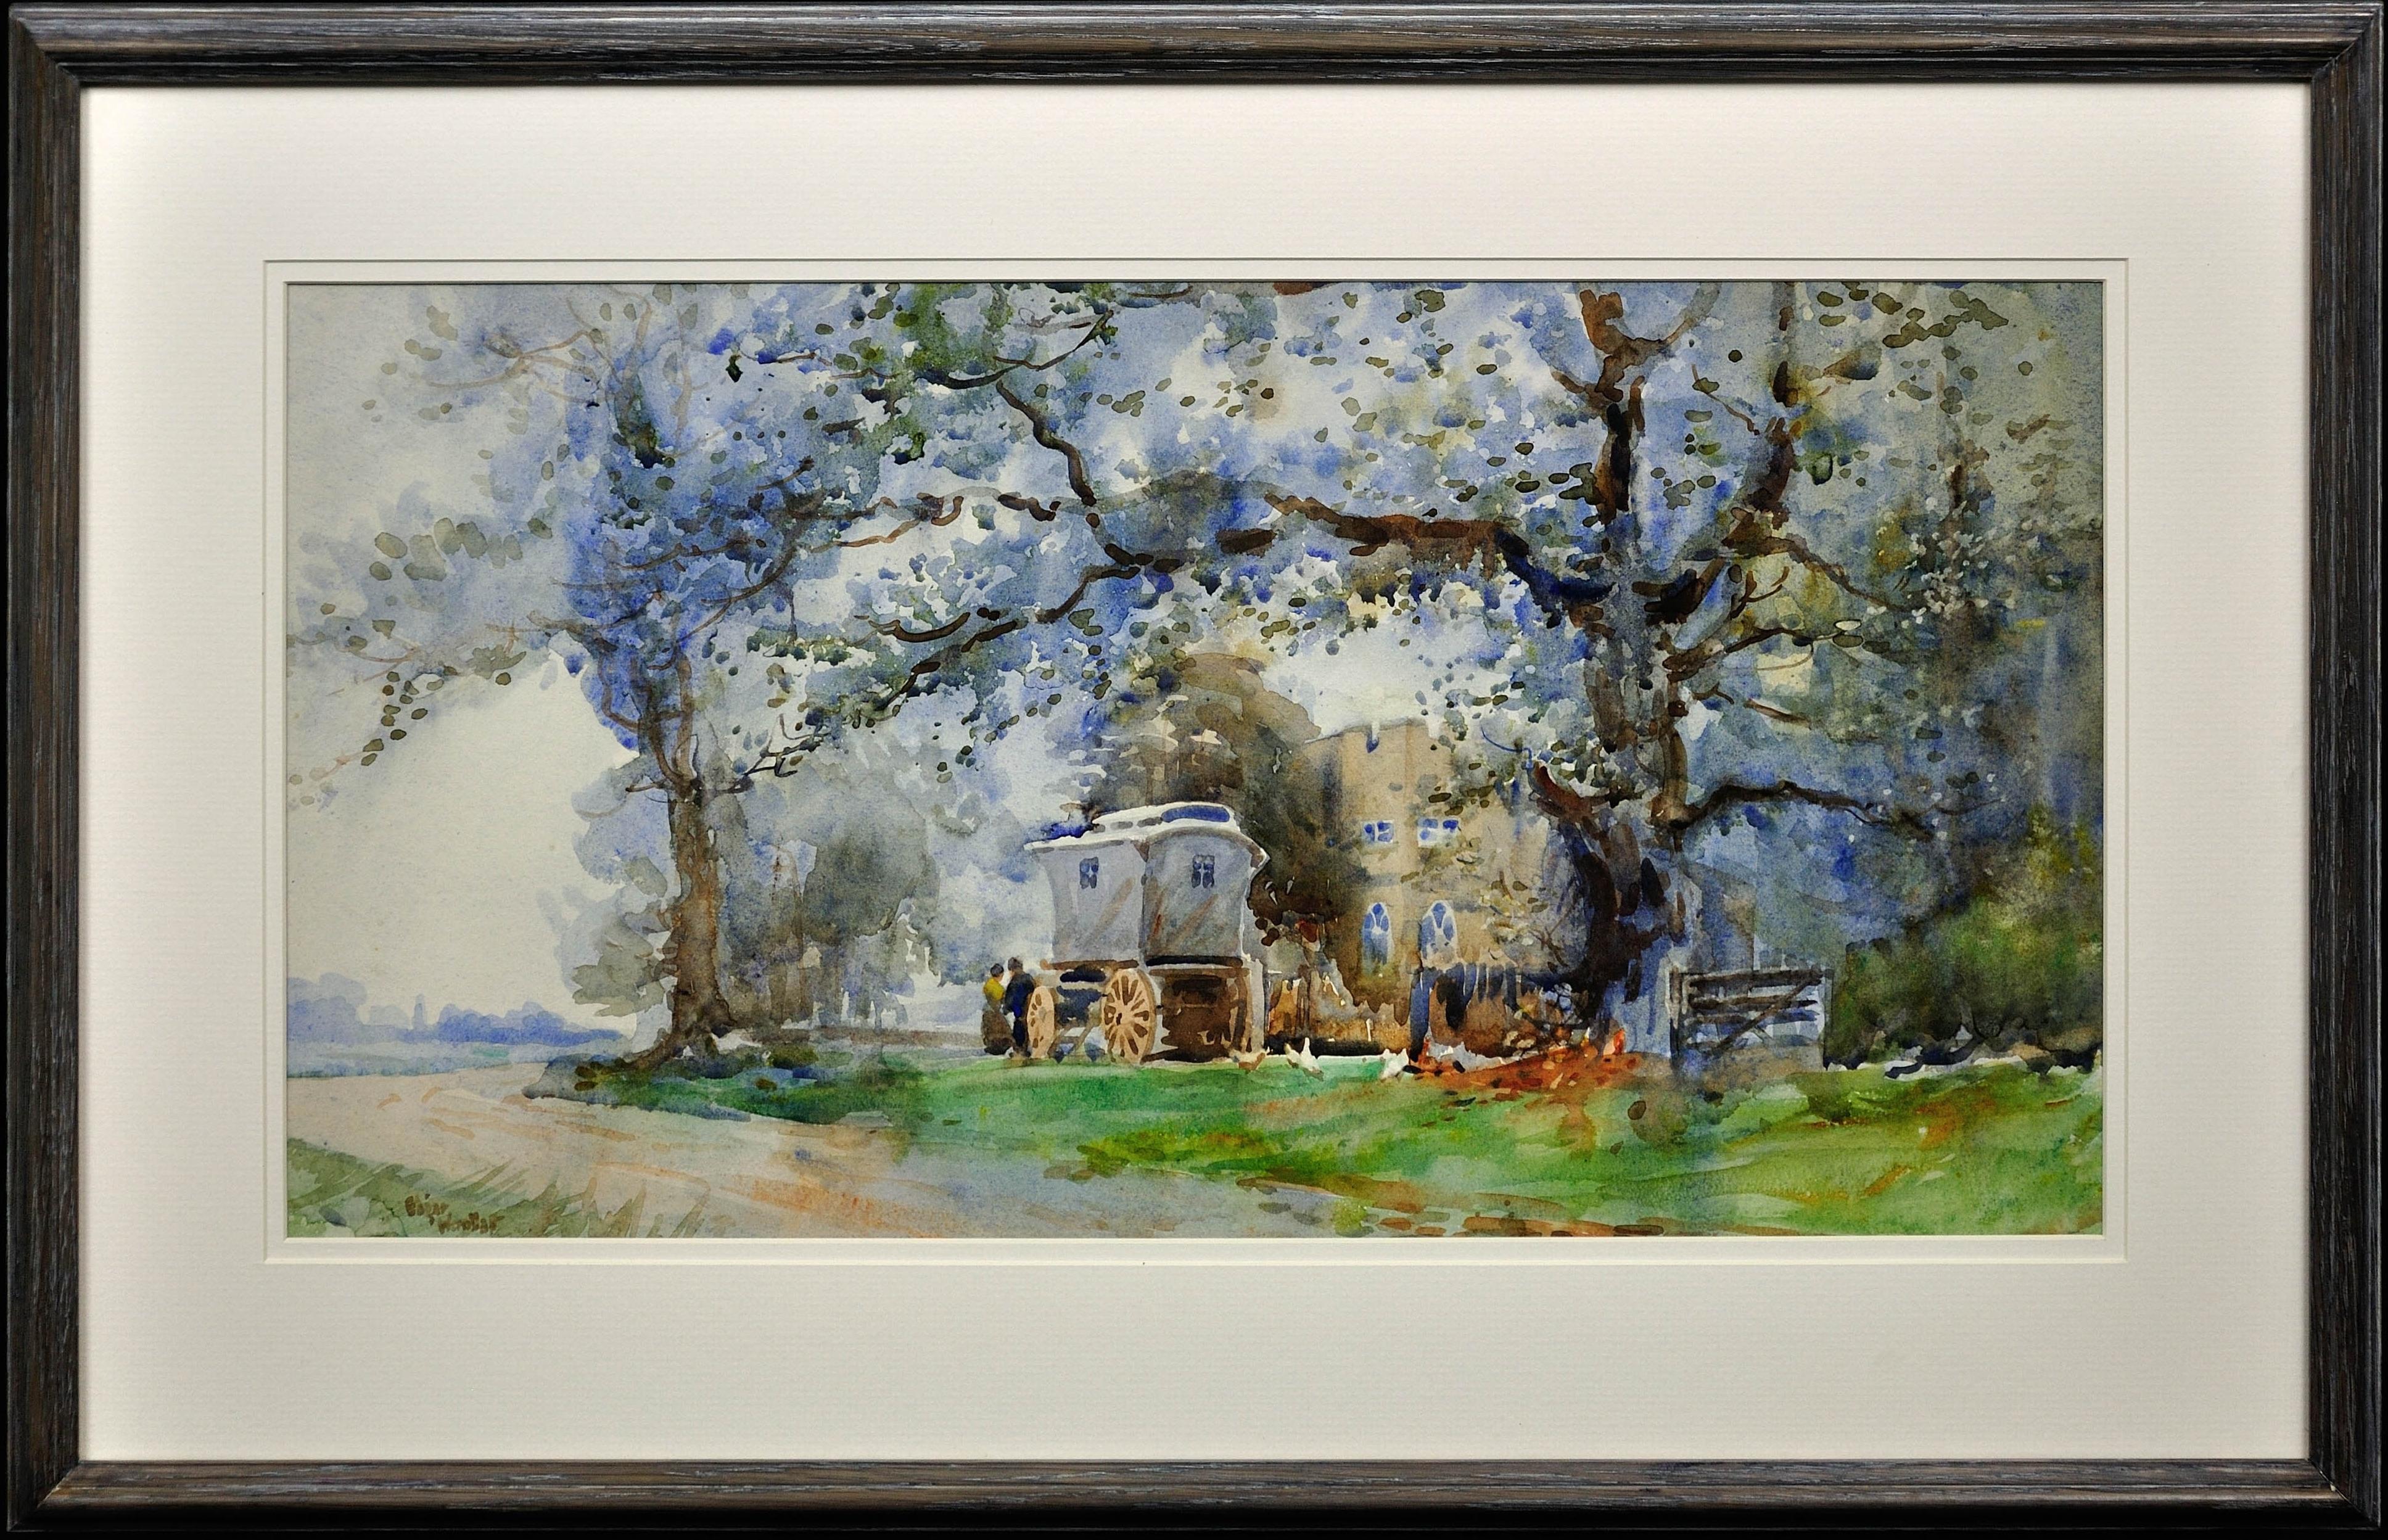 Framed Drawings and Watercolor Paintings